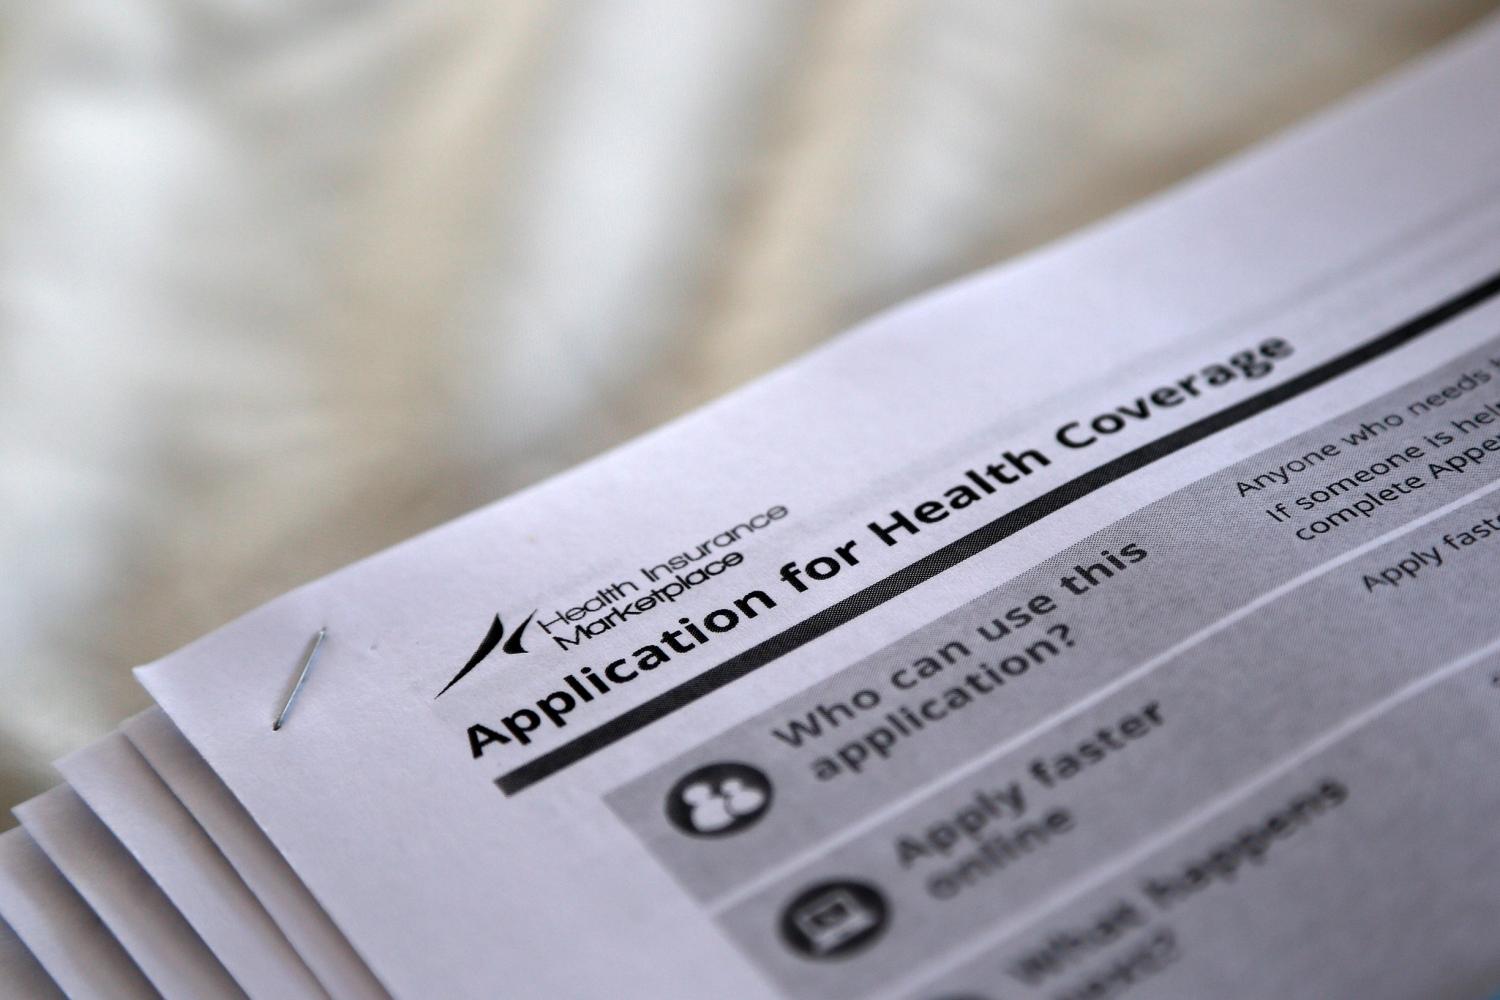 The federal government forms for applying for health coverage are seen at a rally held by supporters of the Affordable Care Act, widely referred to as "Obamacare", outside the Jackson-Hinds Comprehensive Health Center in Jackson, Mississippi, U.S. on October 4, 2013. REUTERS/Jonathan Bachman/File Photo - RTSO349